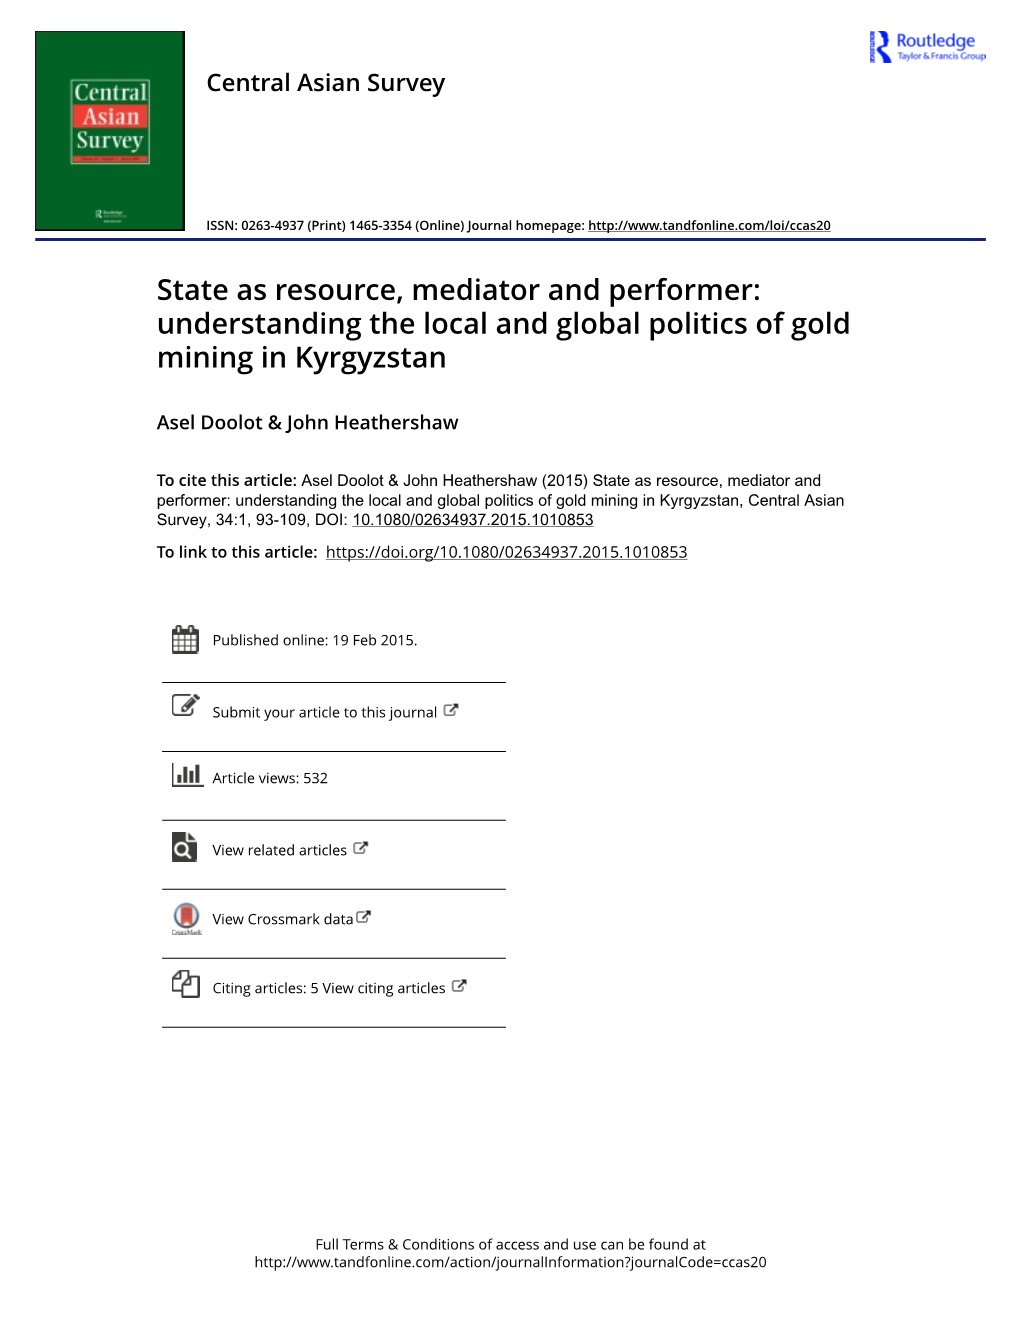 Understanding the Local and Global Politics of Gold Mining in Kyrgyzstan